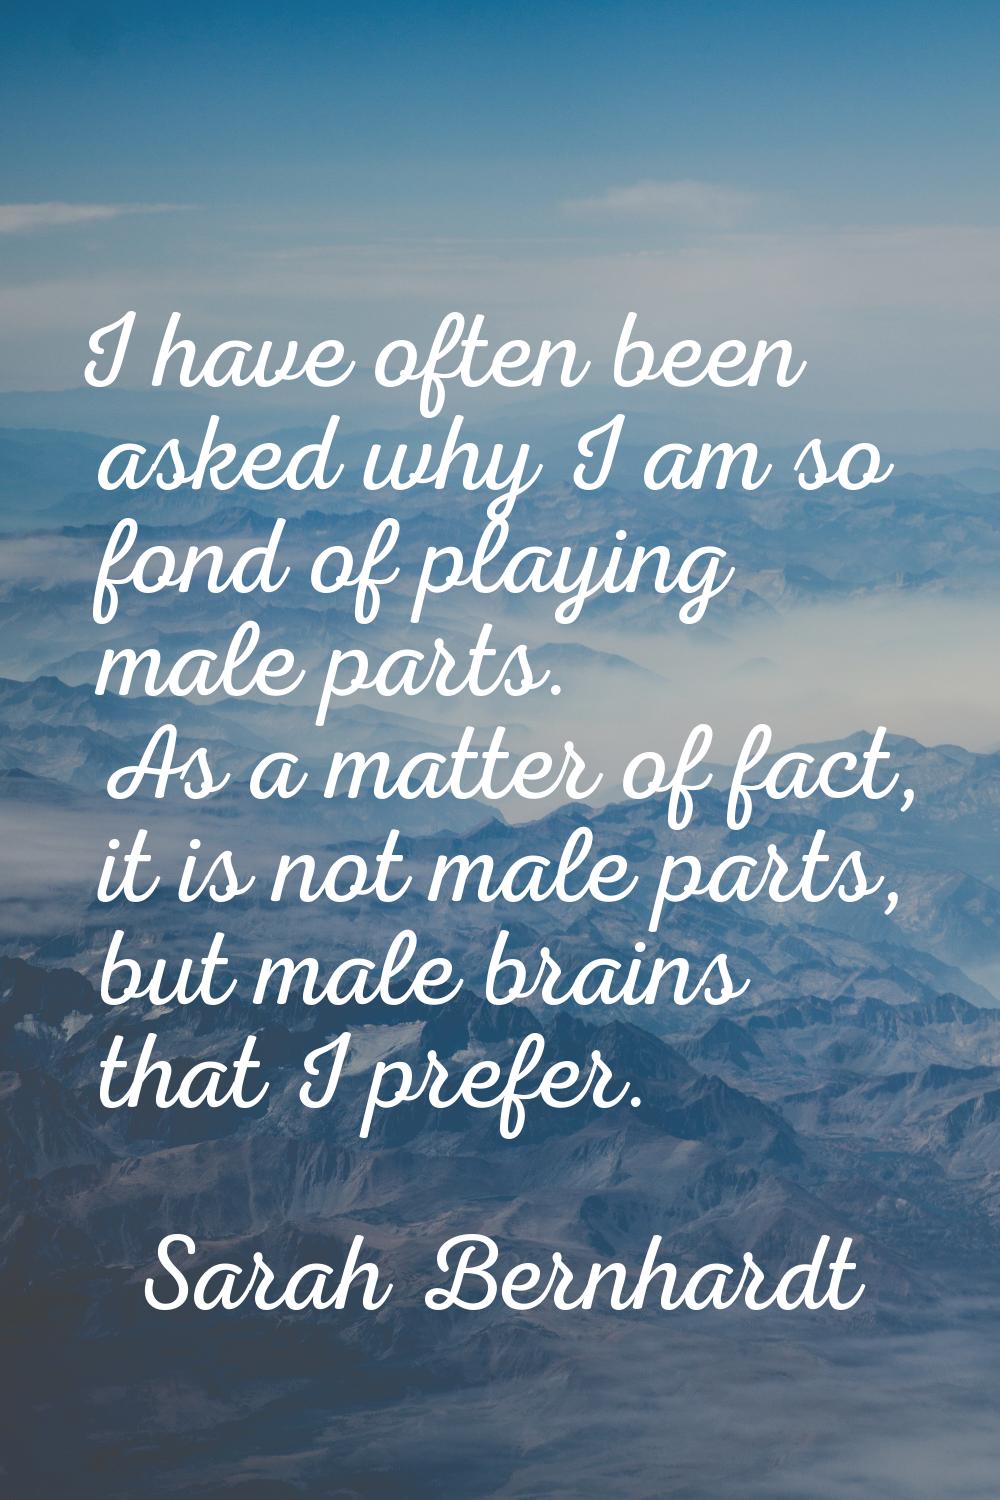 I have often been asked why I am so fond of playing male parts. As a matter of fact, it is not male